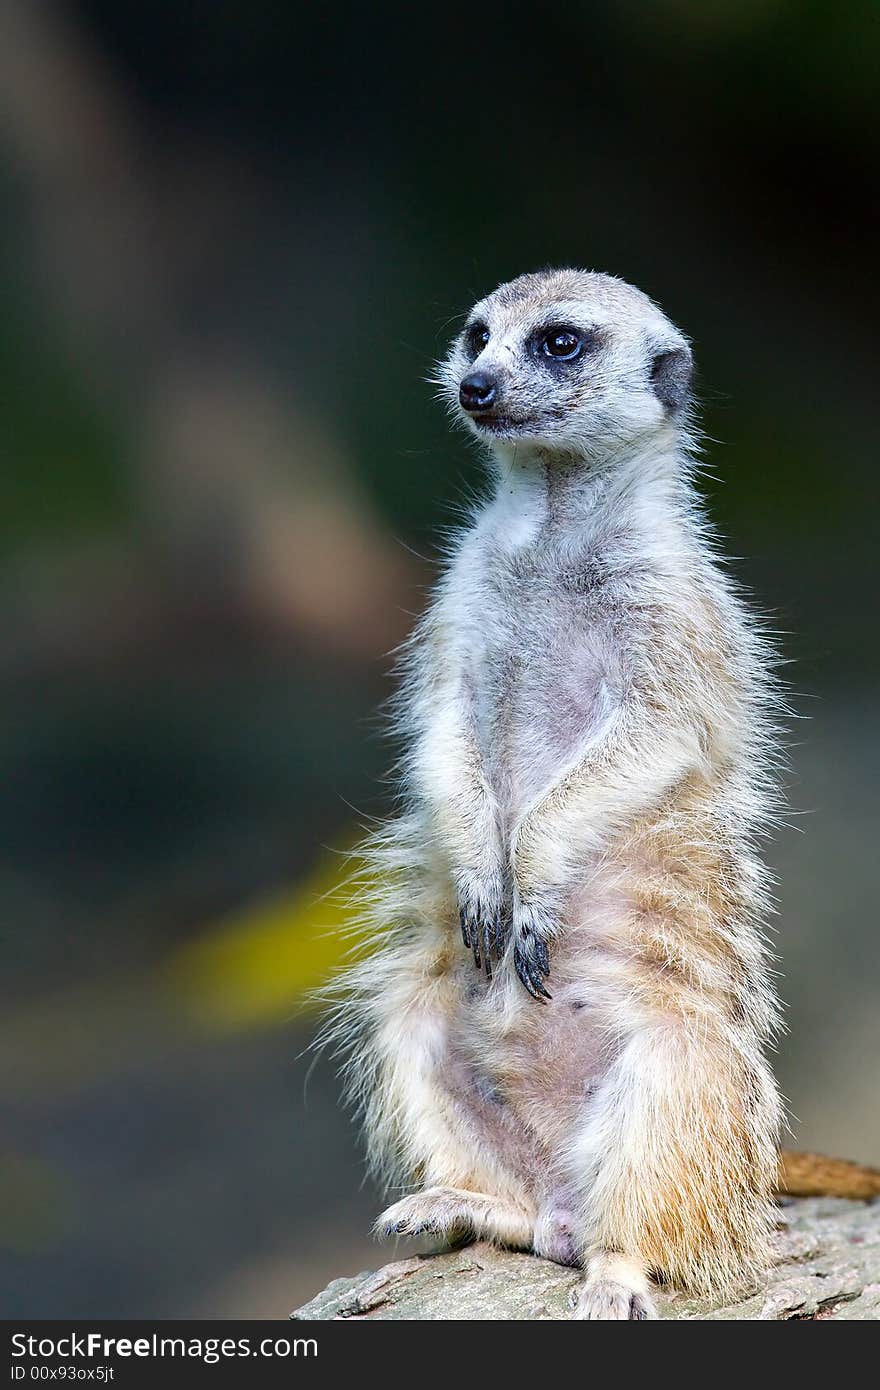 This cute animal is standing upright, looks like it waiting for something. This cute animal is standing upright, looks like it waiting for something...